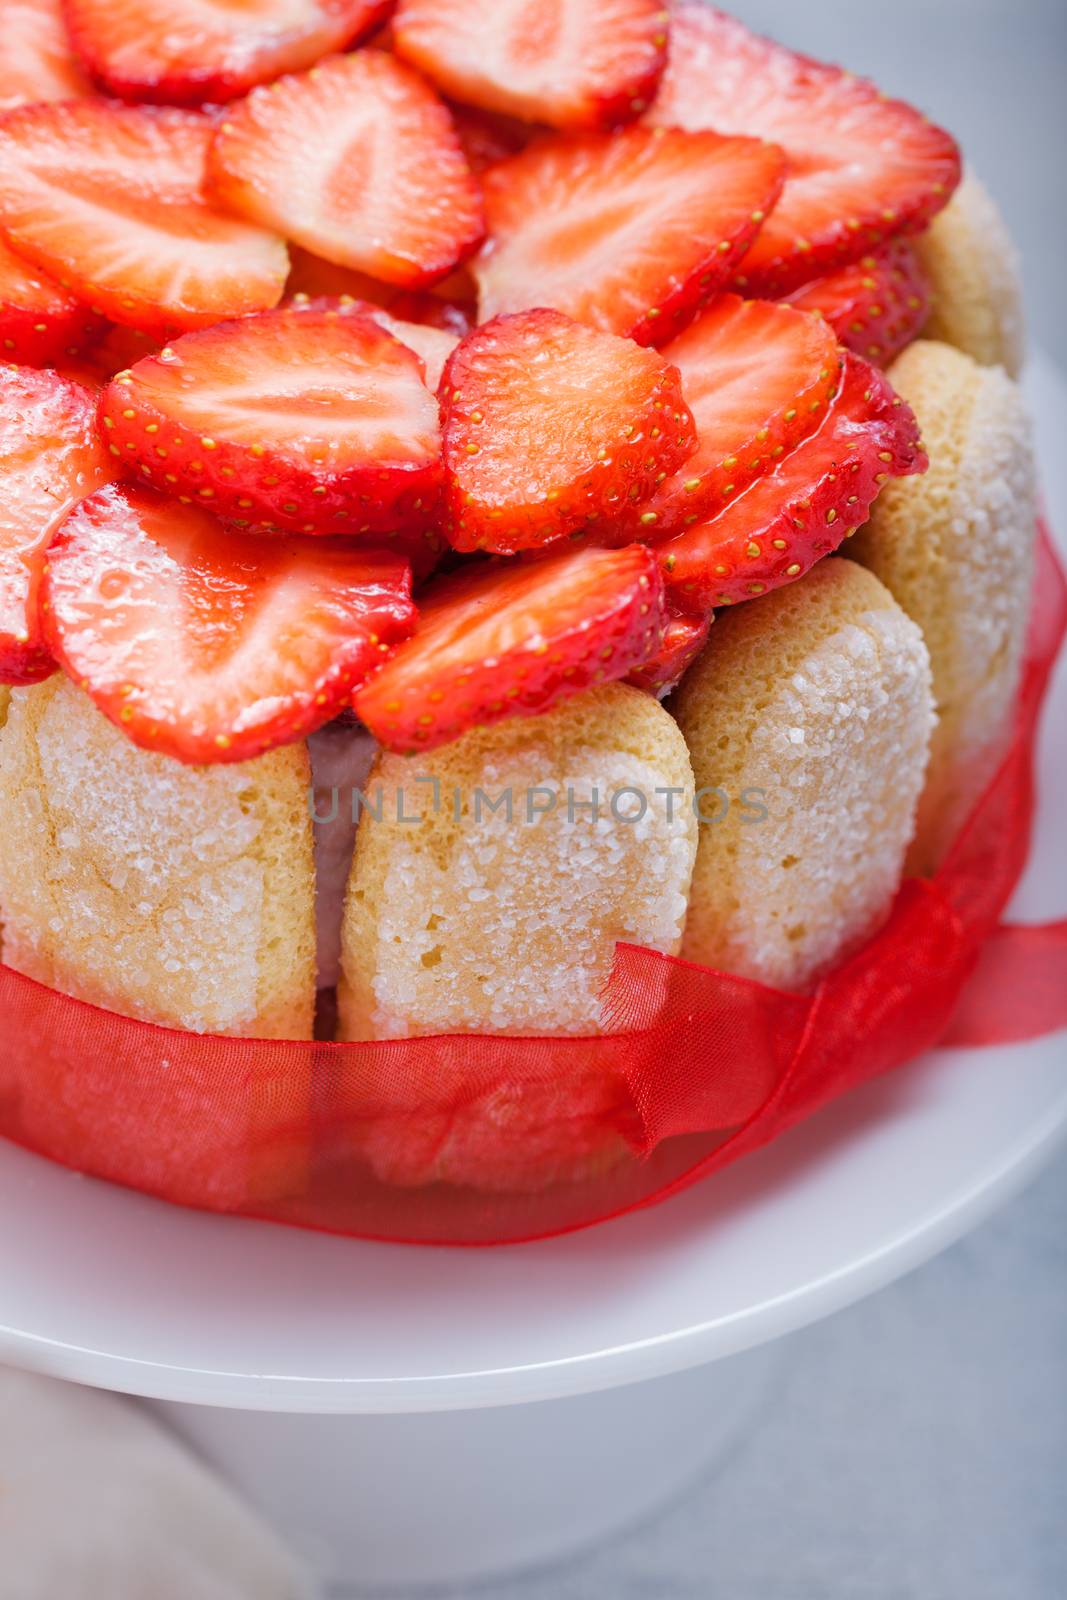 Cake Charlotte with strawberries by supercat67